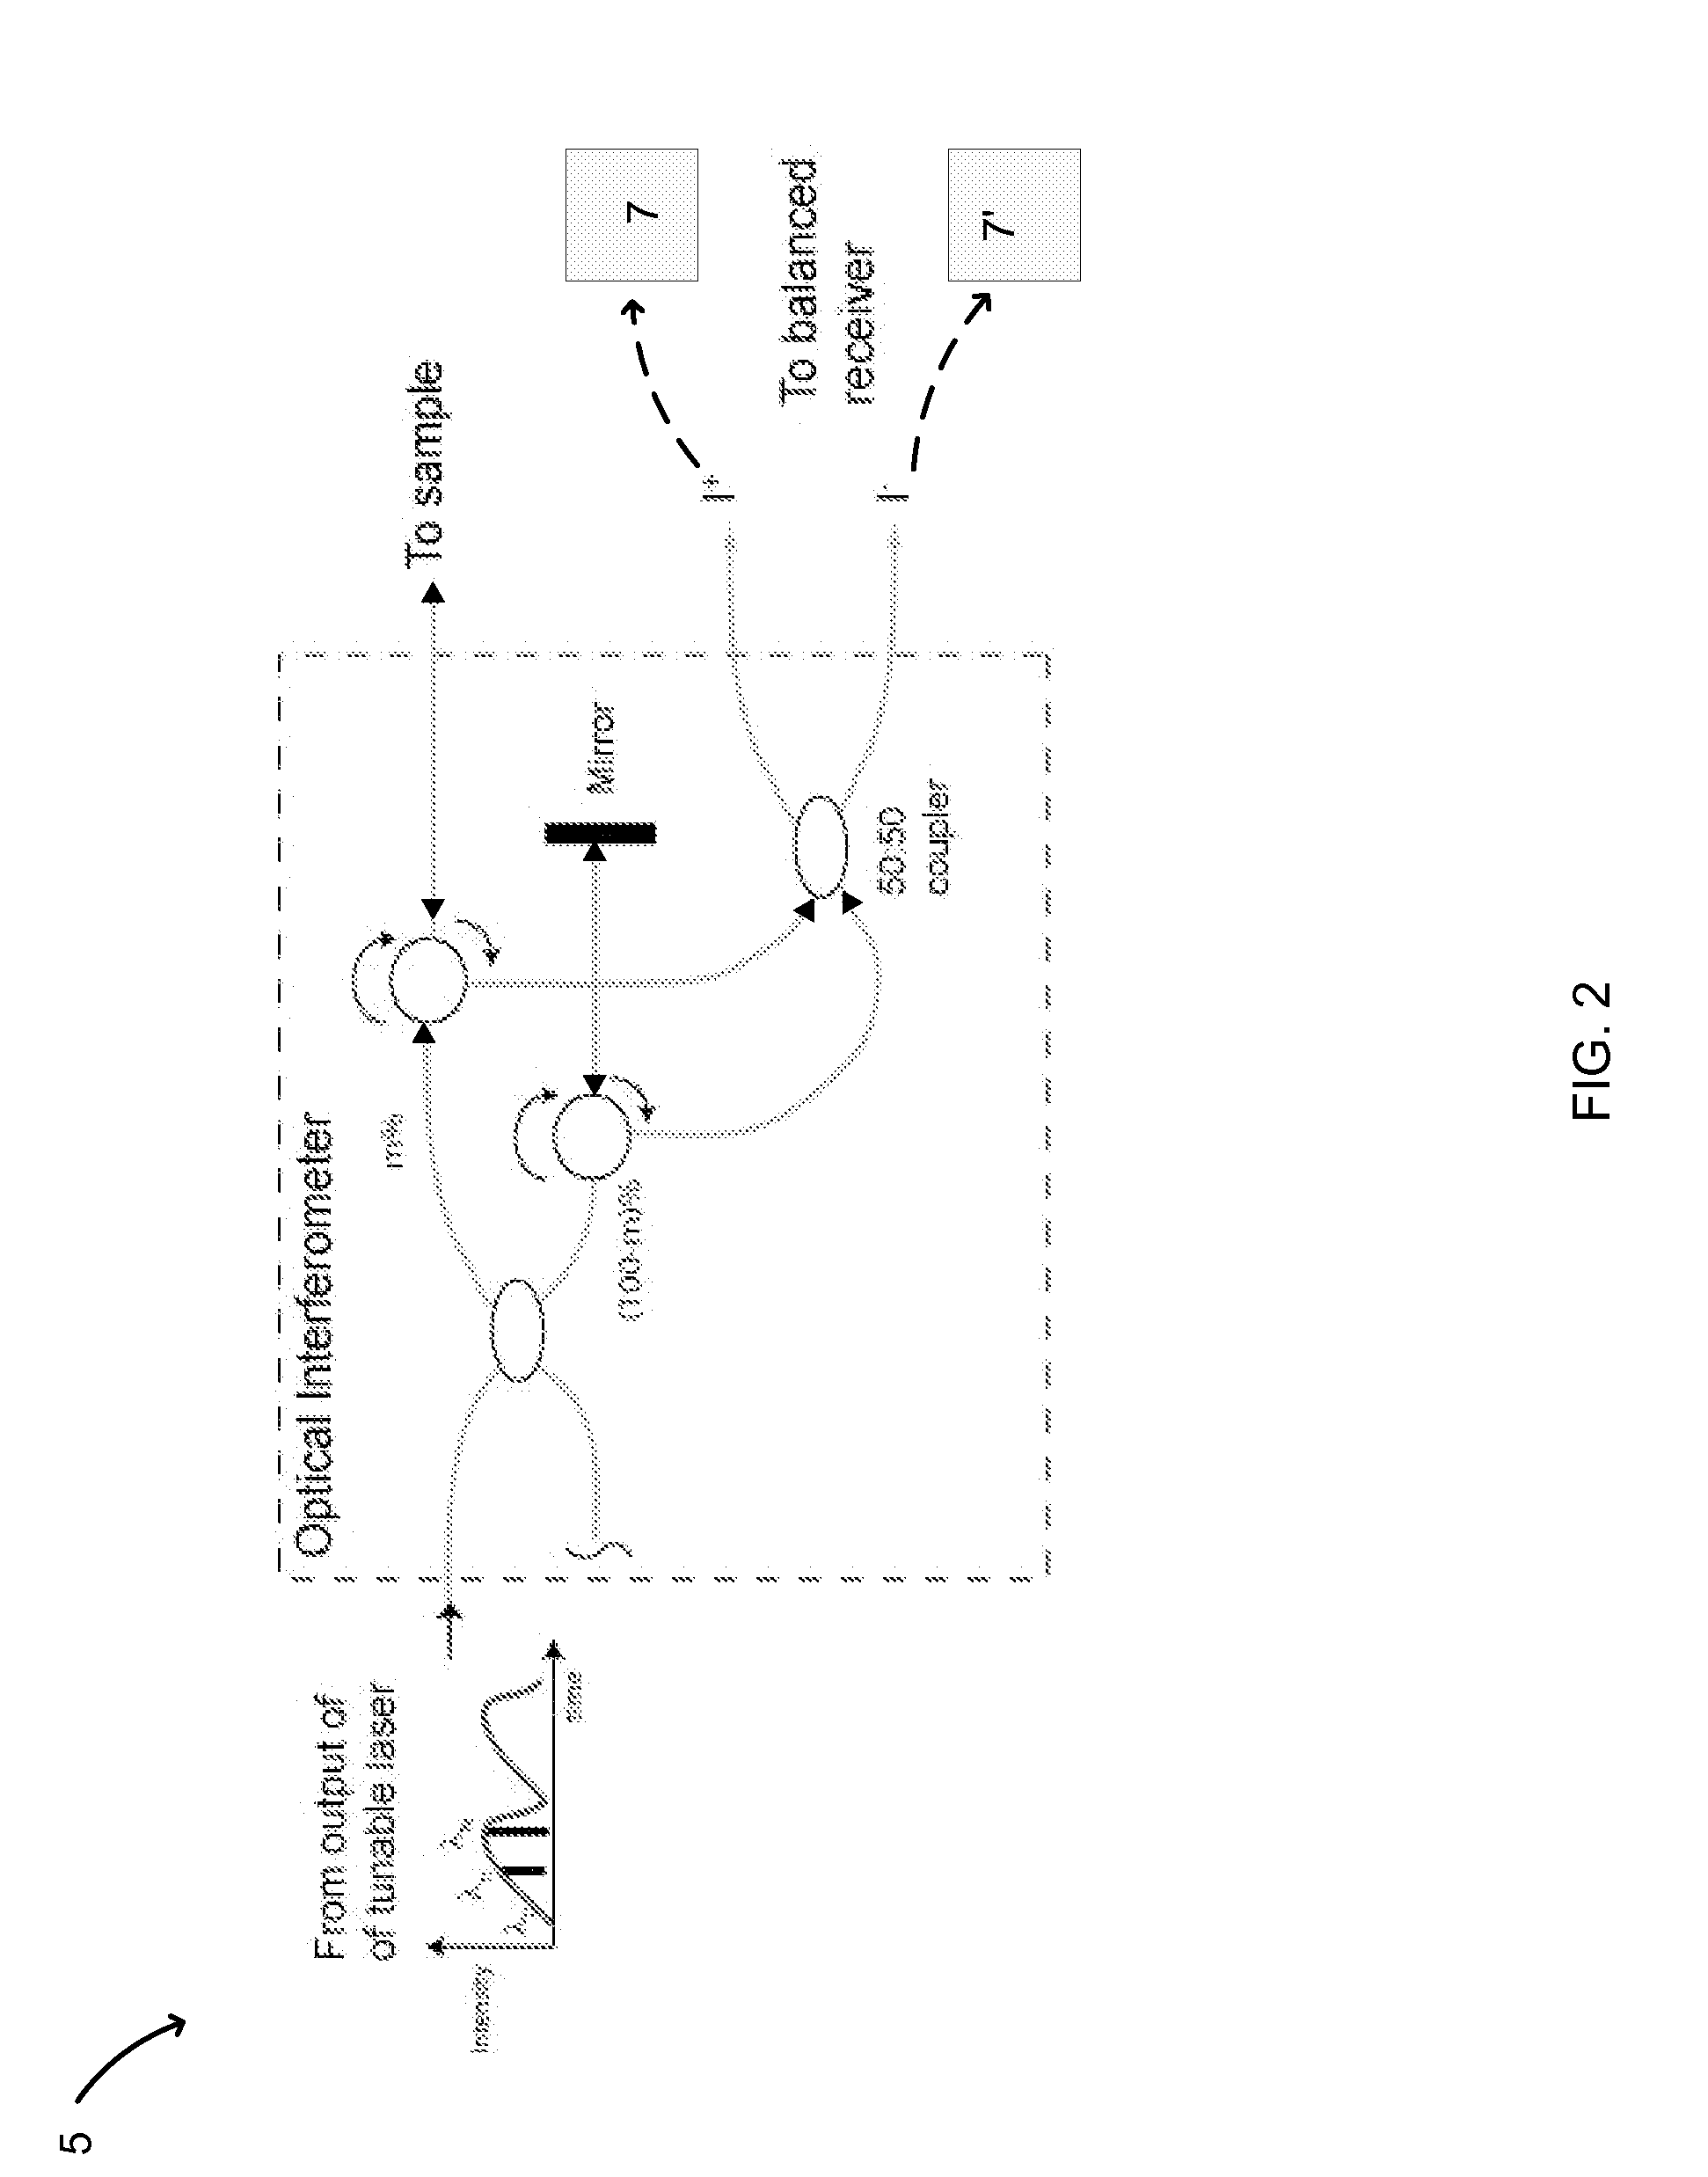 Intensity Noise Reduction Methods and Apparatus for Interferometric Sensing and Imaging Systems